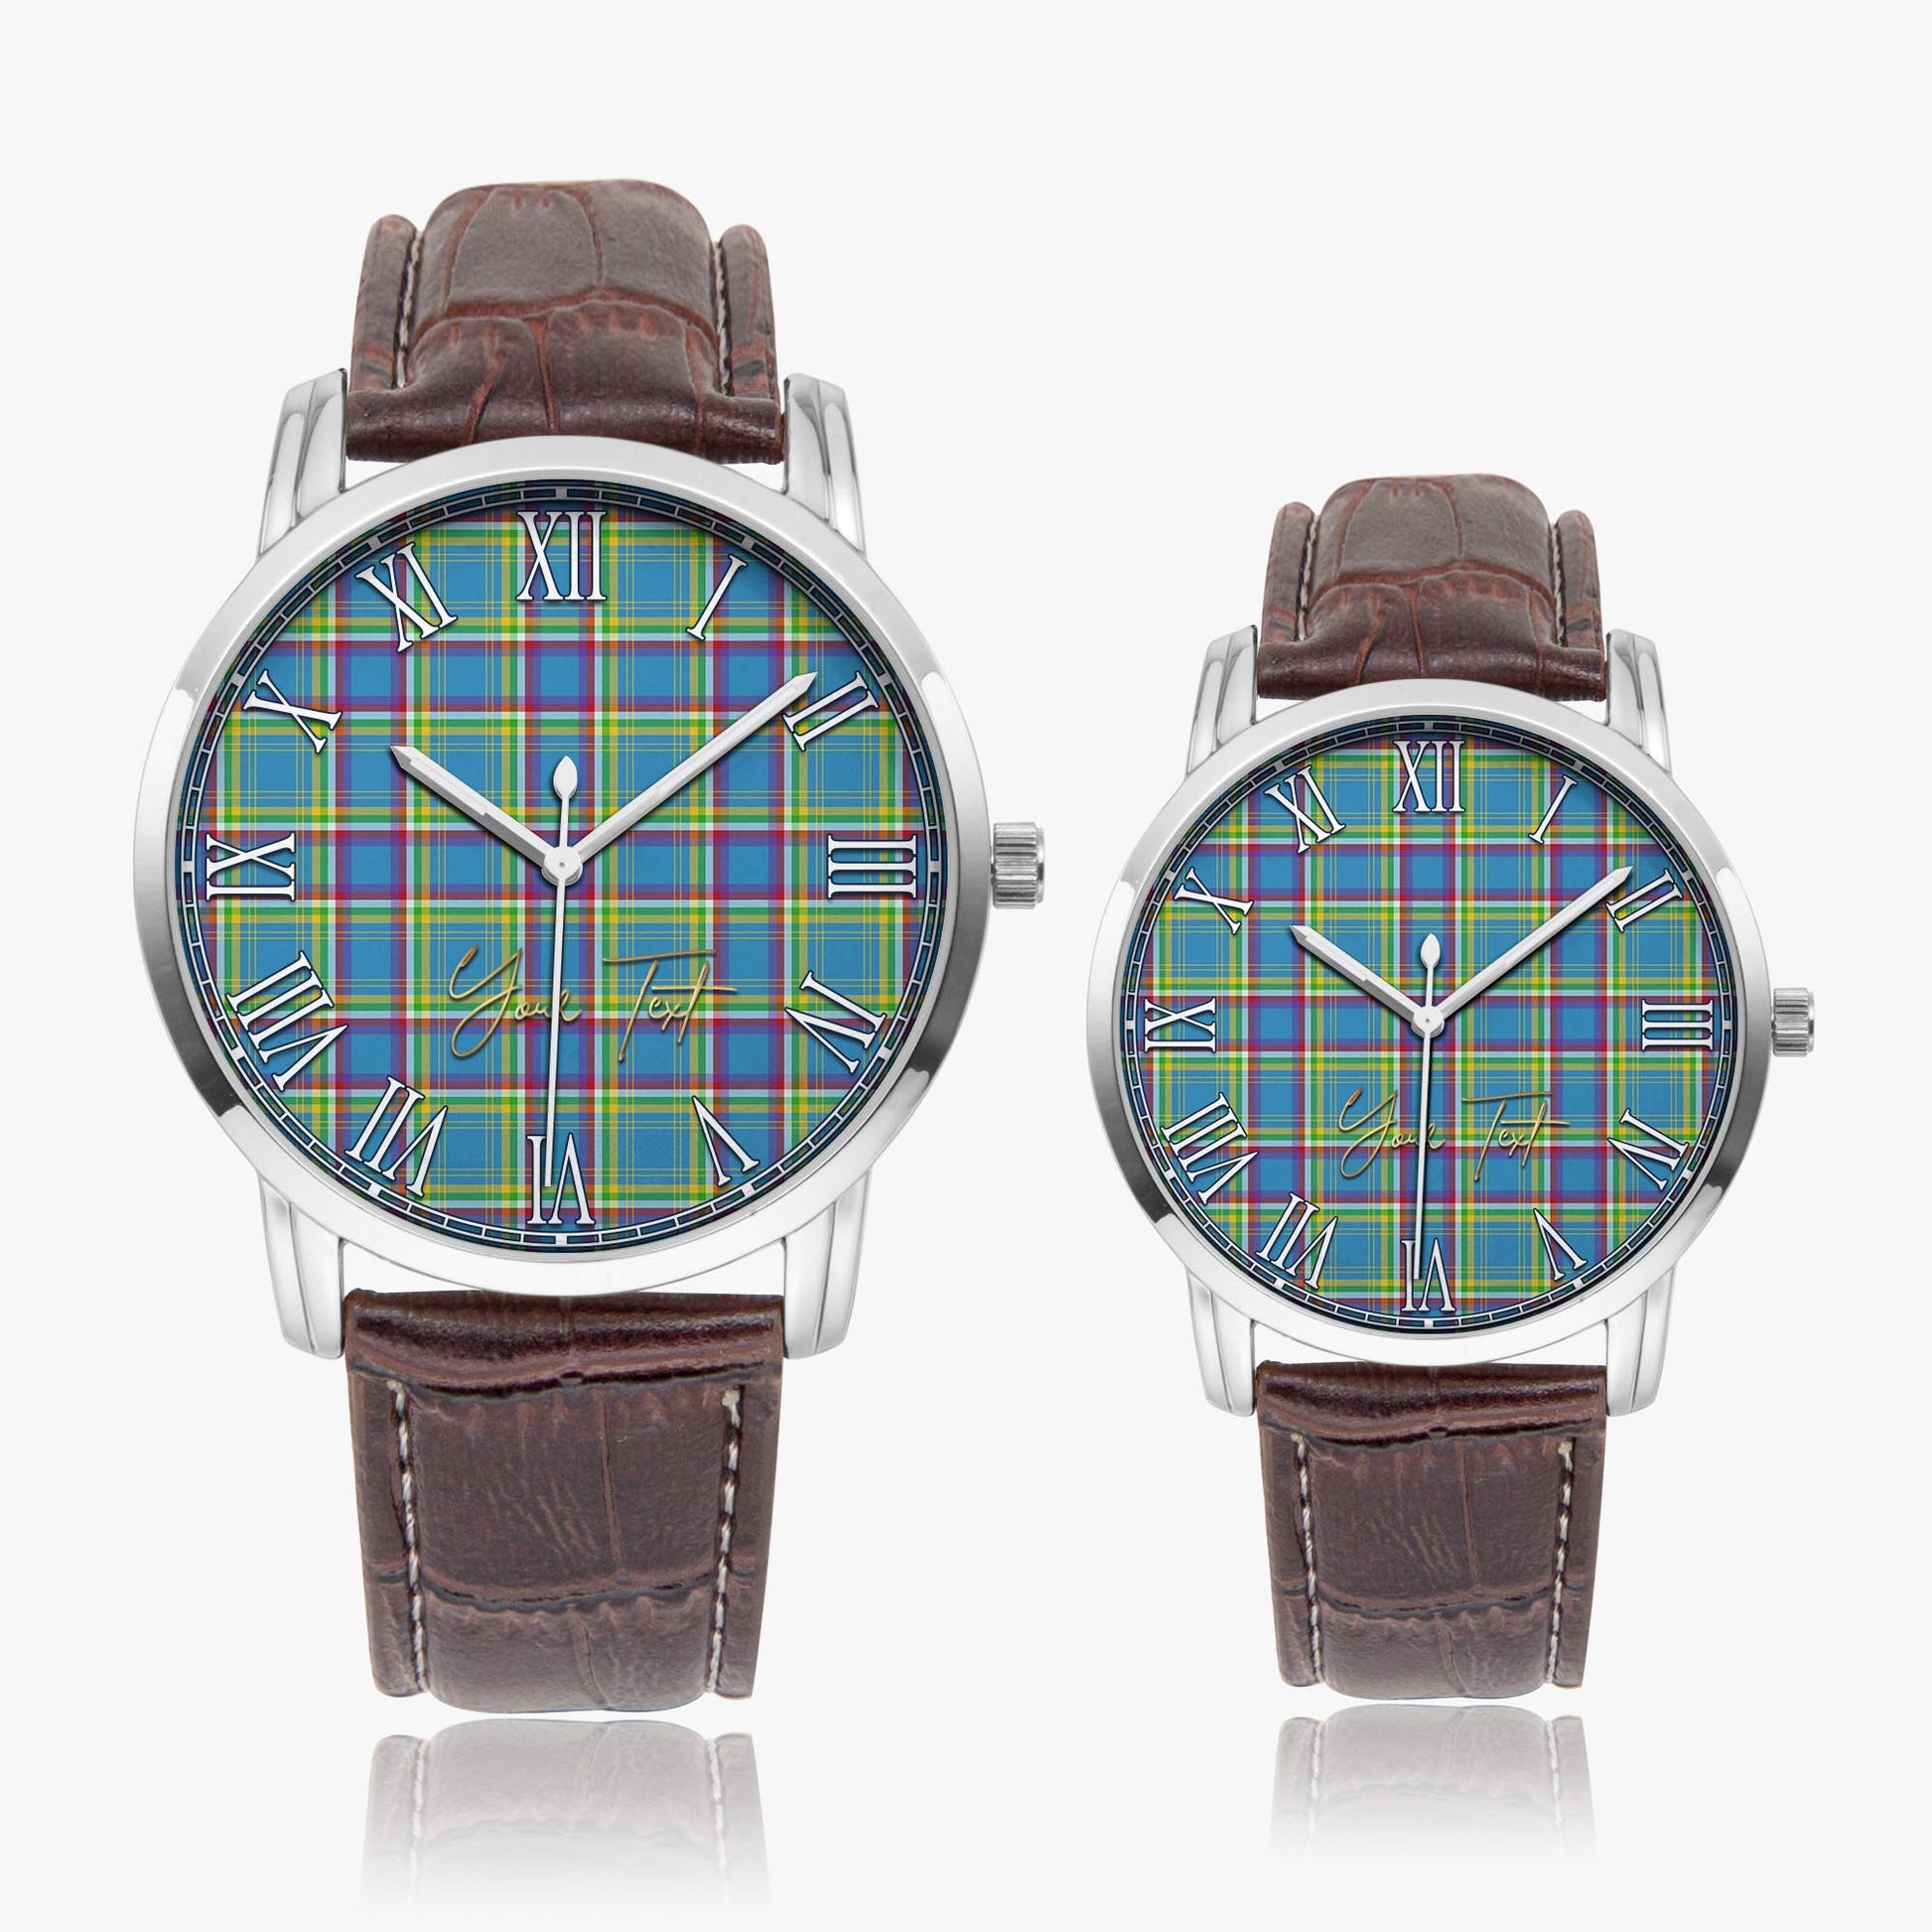 Yukon Territory Canada Tartan Personalized Your Text Leather Trap Quartz Watch Wide Type Silver Case With Brown Leather Strap - Tartanvibesclothing Shop